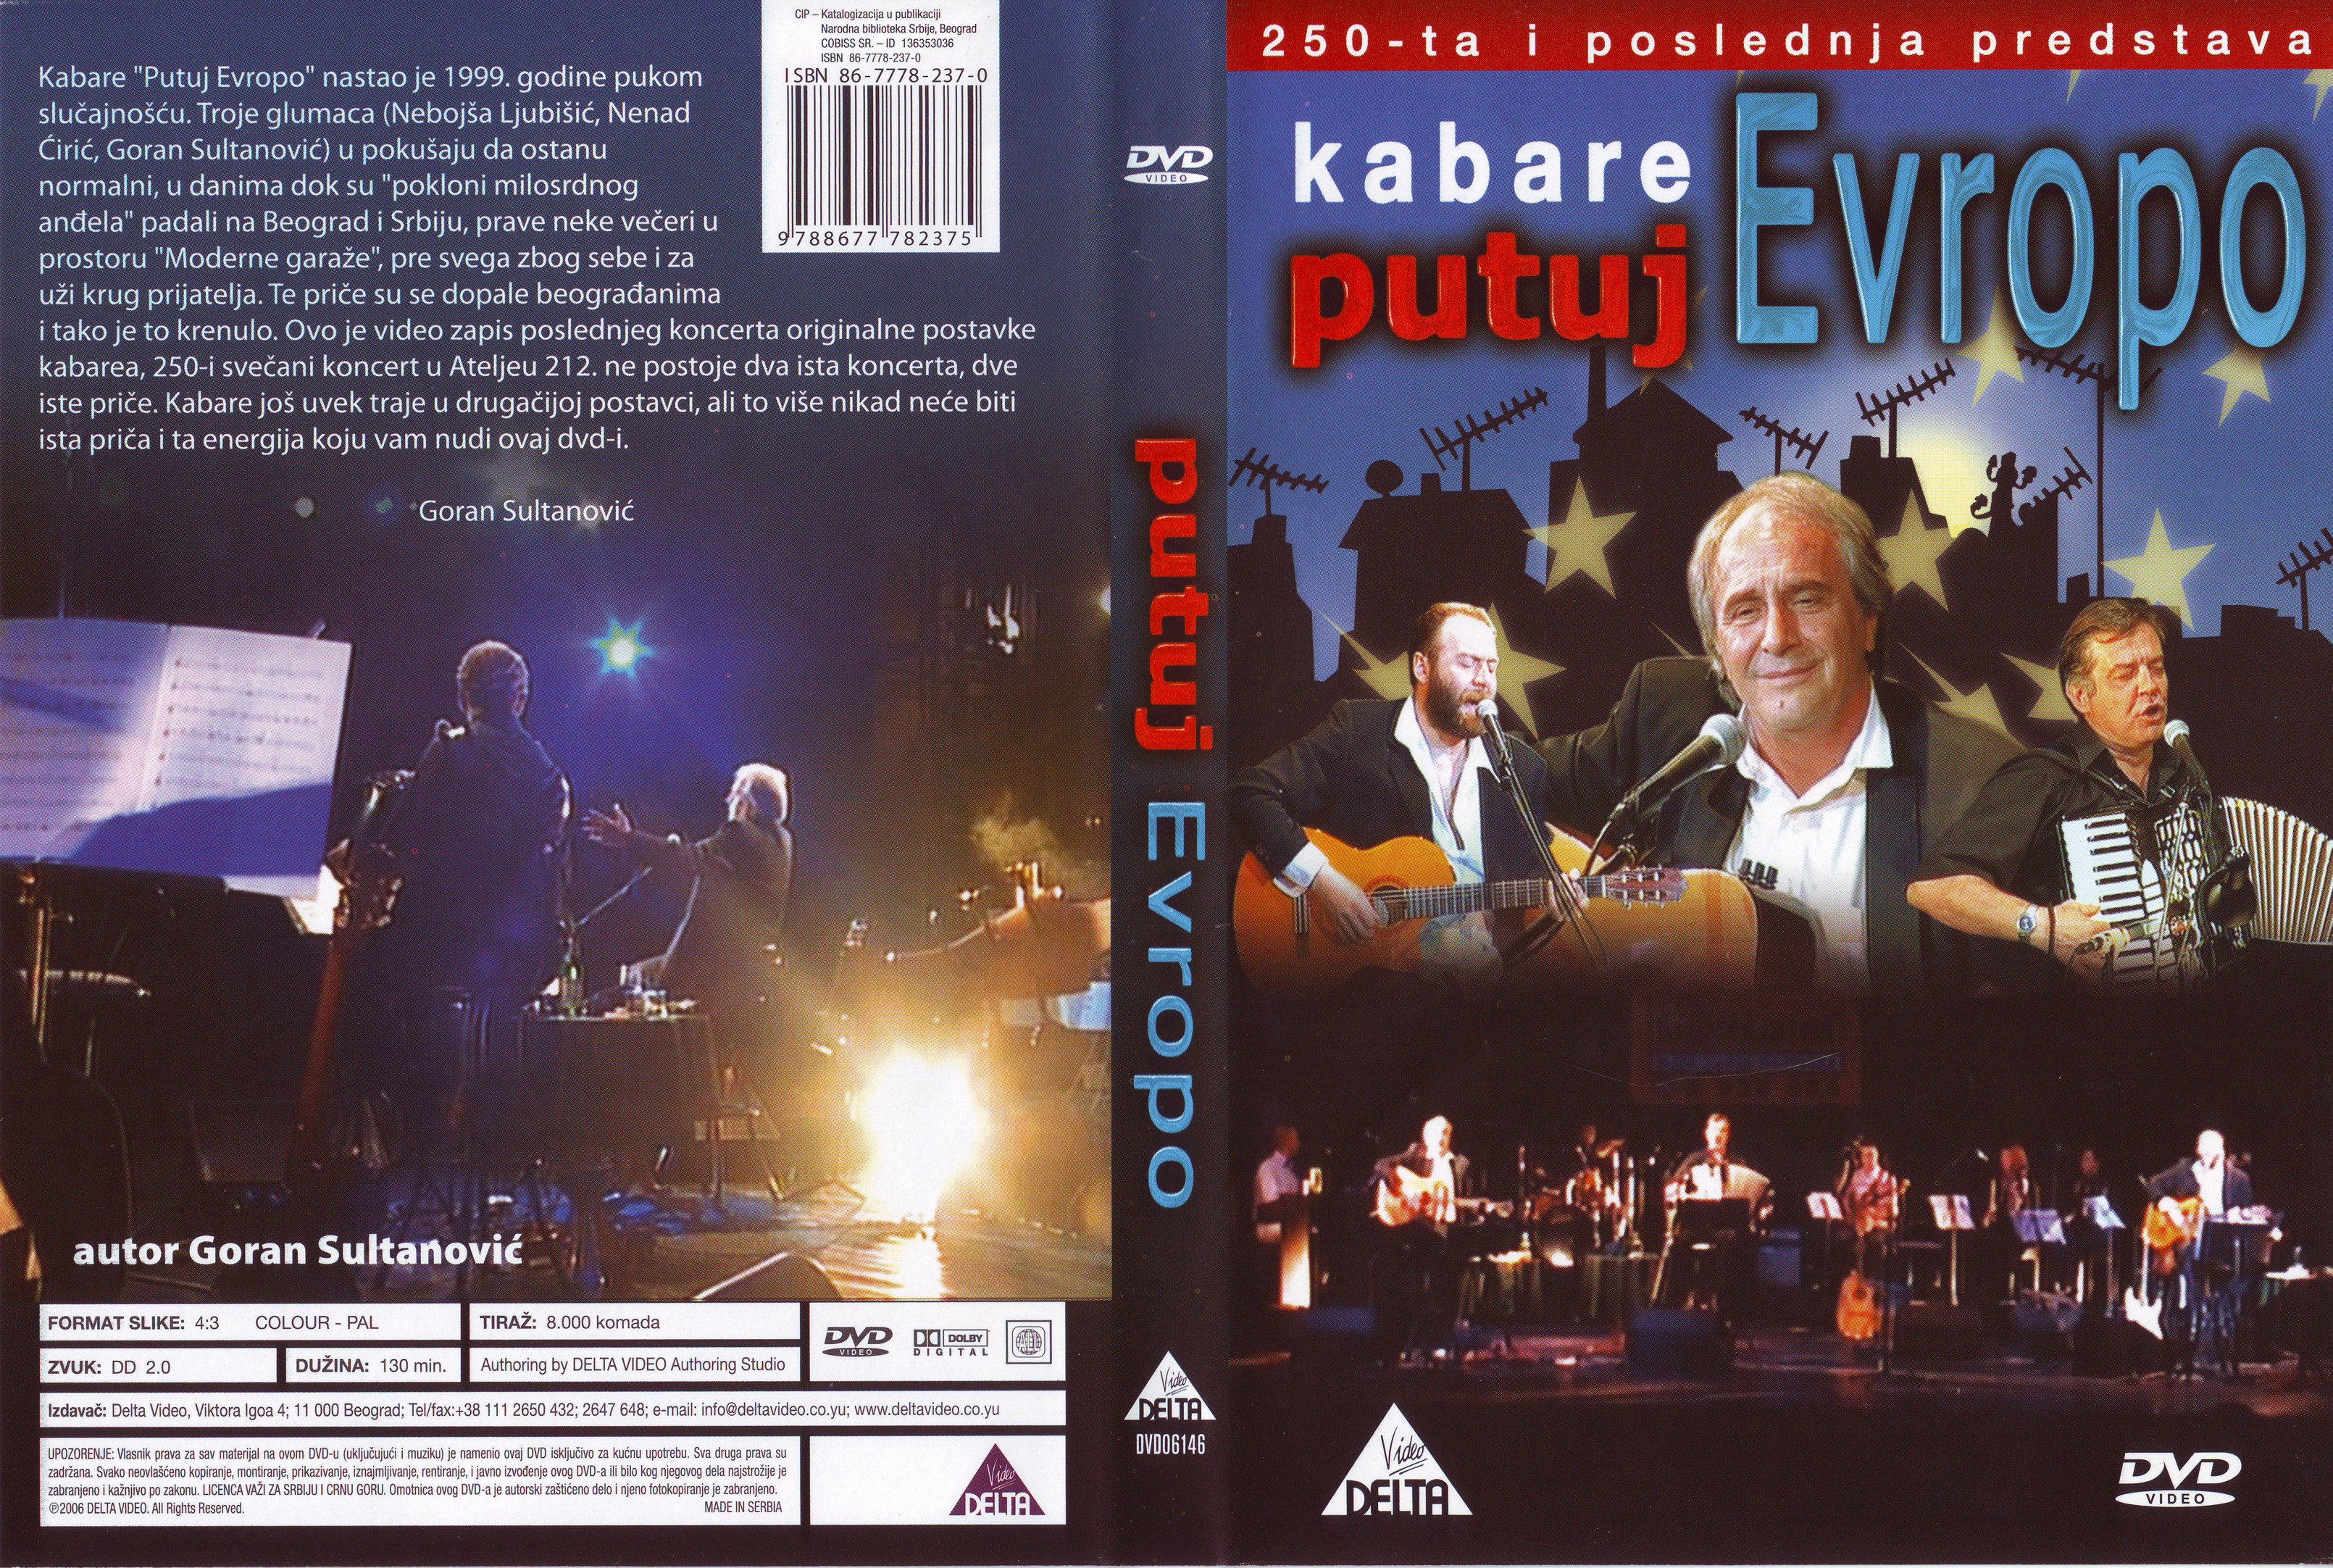 Click to view full size image -  DVD Cover - 0-9 - DVD - KABARE PUTUJ EVROPO - DVD - KABARE PUTUJ EVROPO.jpg